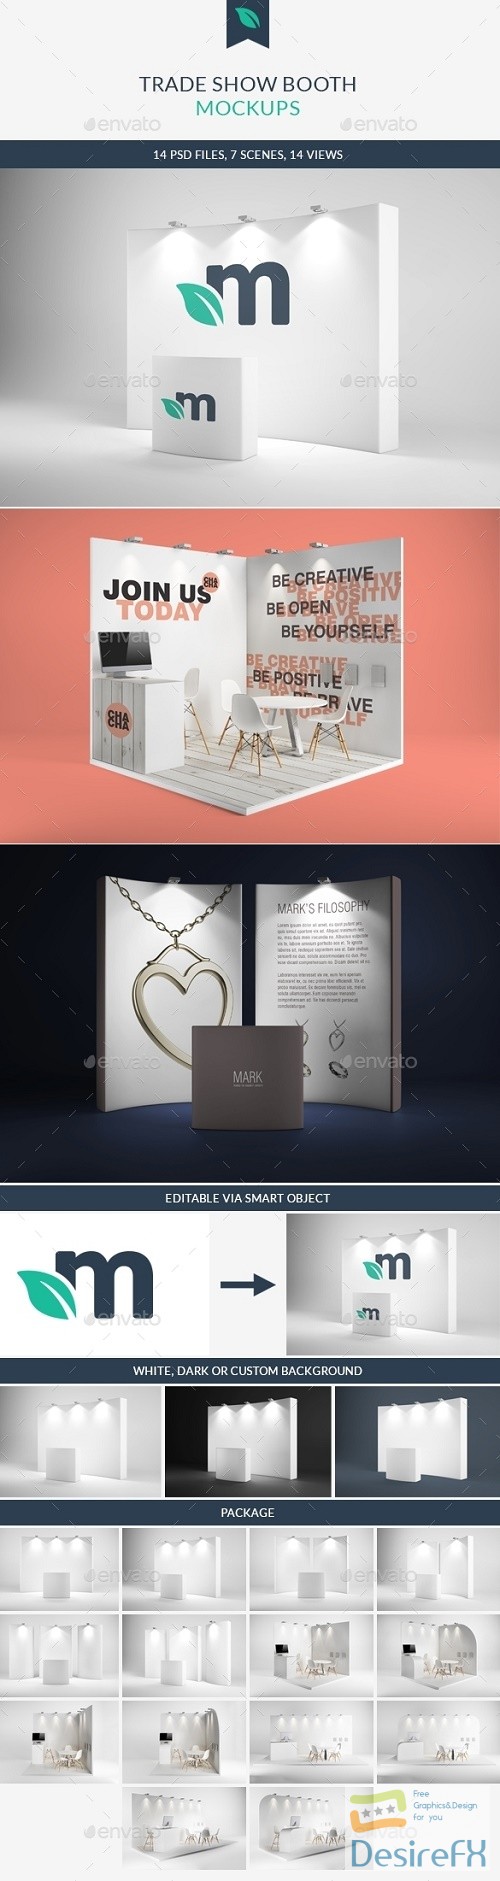 Trade Show Booth Mockups 9273909